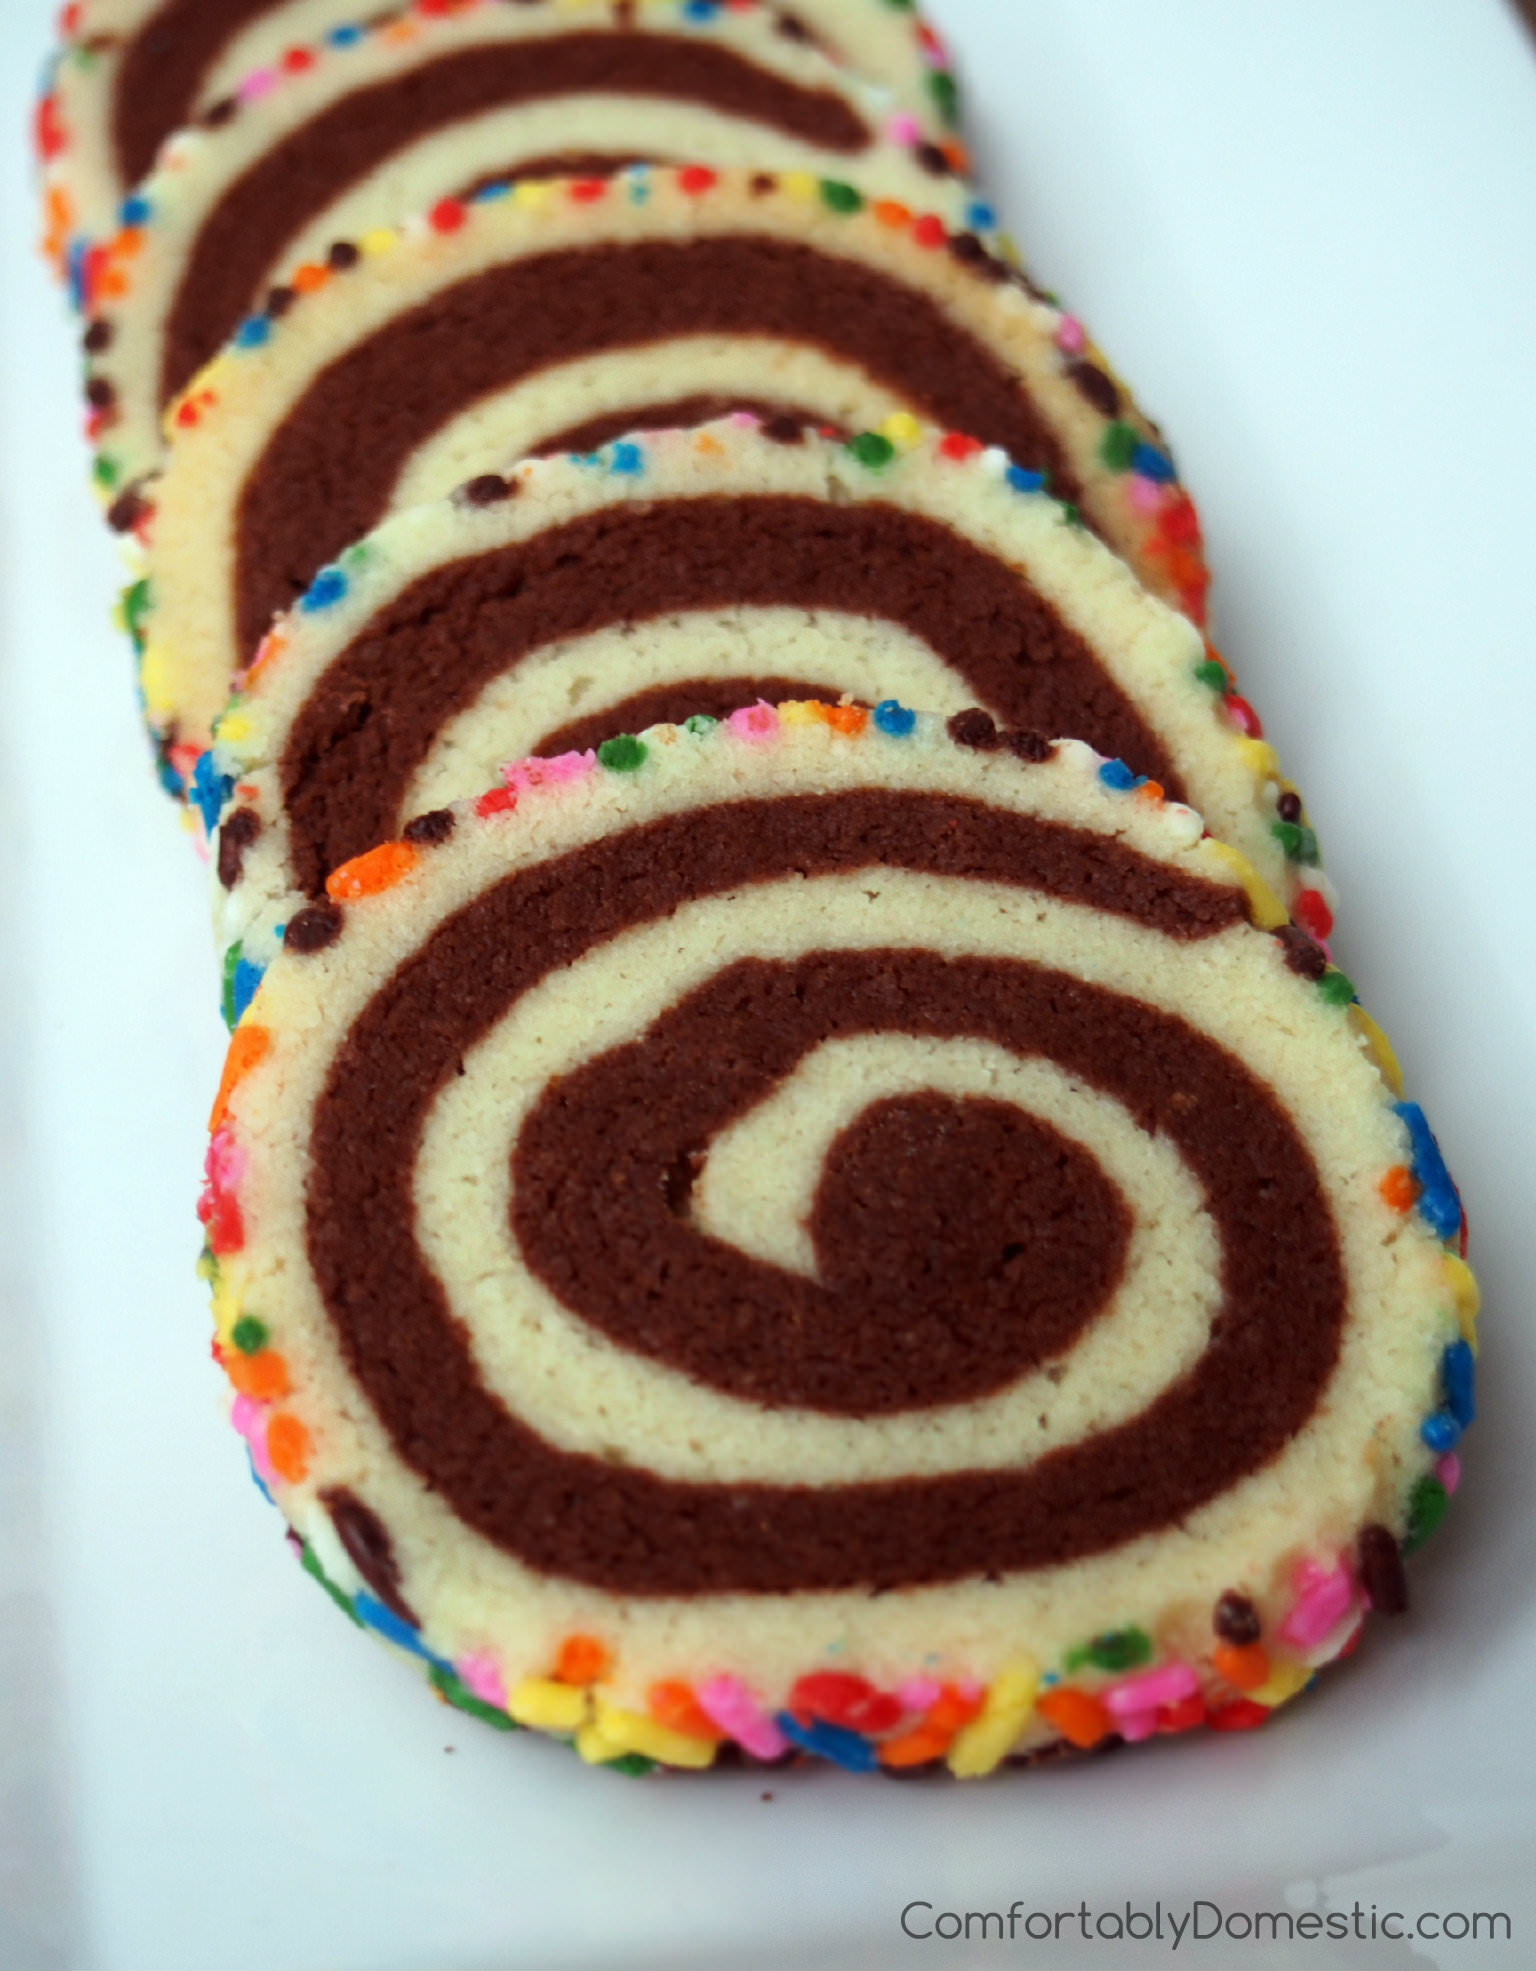 Shortbread pinwheels, also known as happiness cookies, are buttery vanilla and chocolate shortbread cookies presented in a fun pinwheel design, with colorful sprinkles for an added touch of whimsy. | ComfortablyDomestic.com